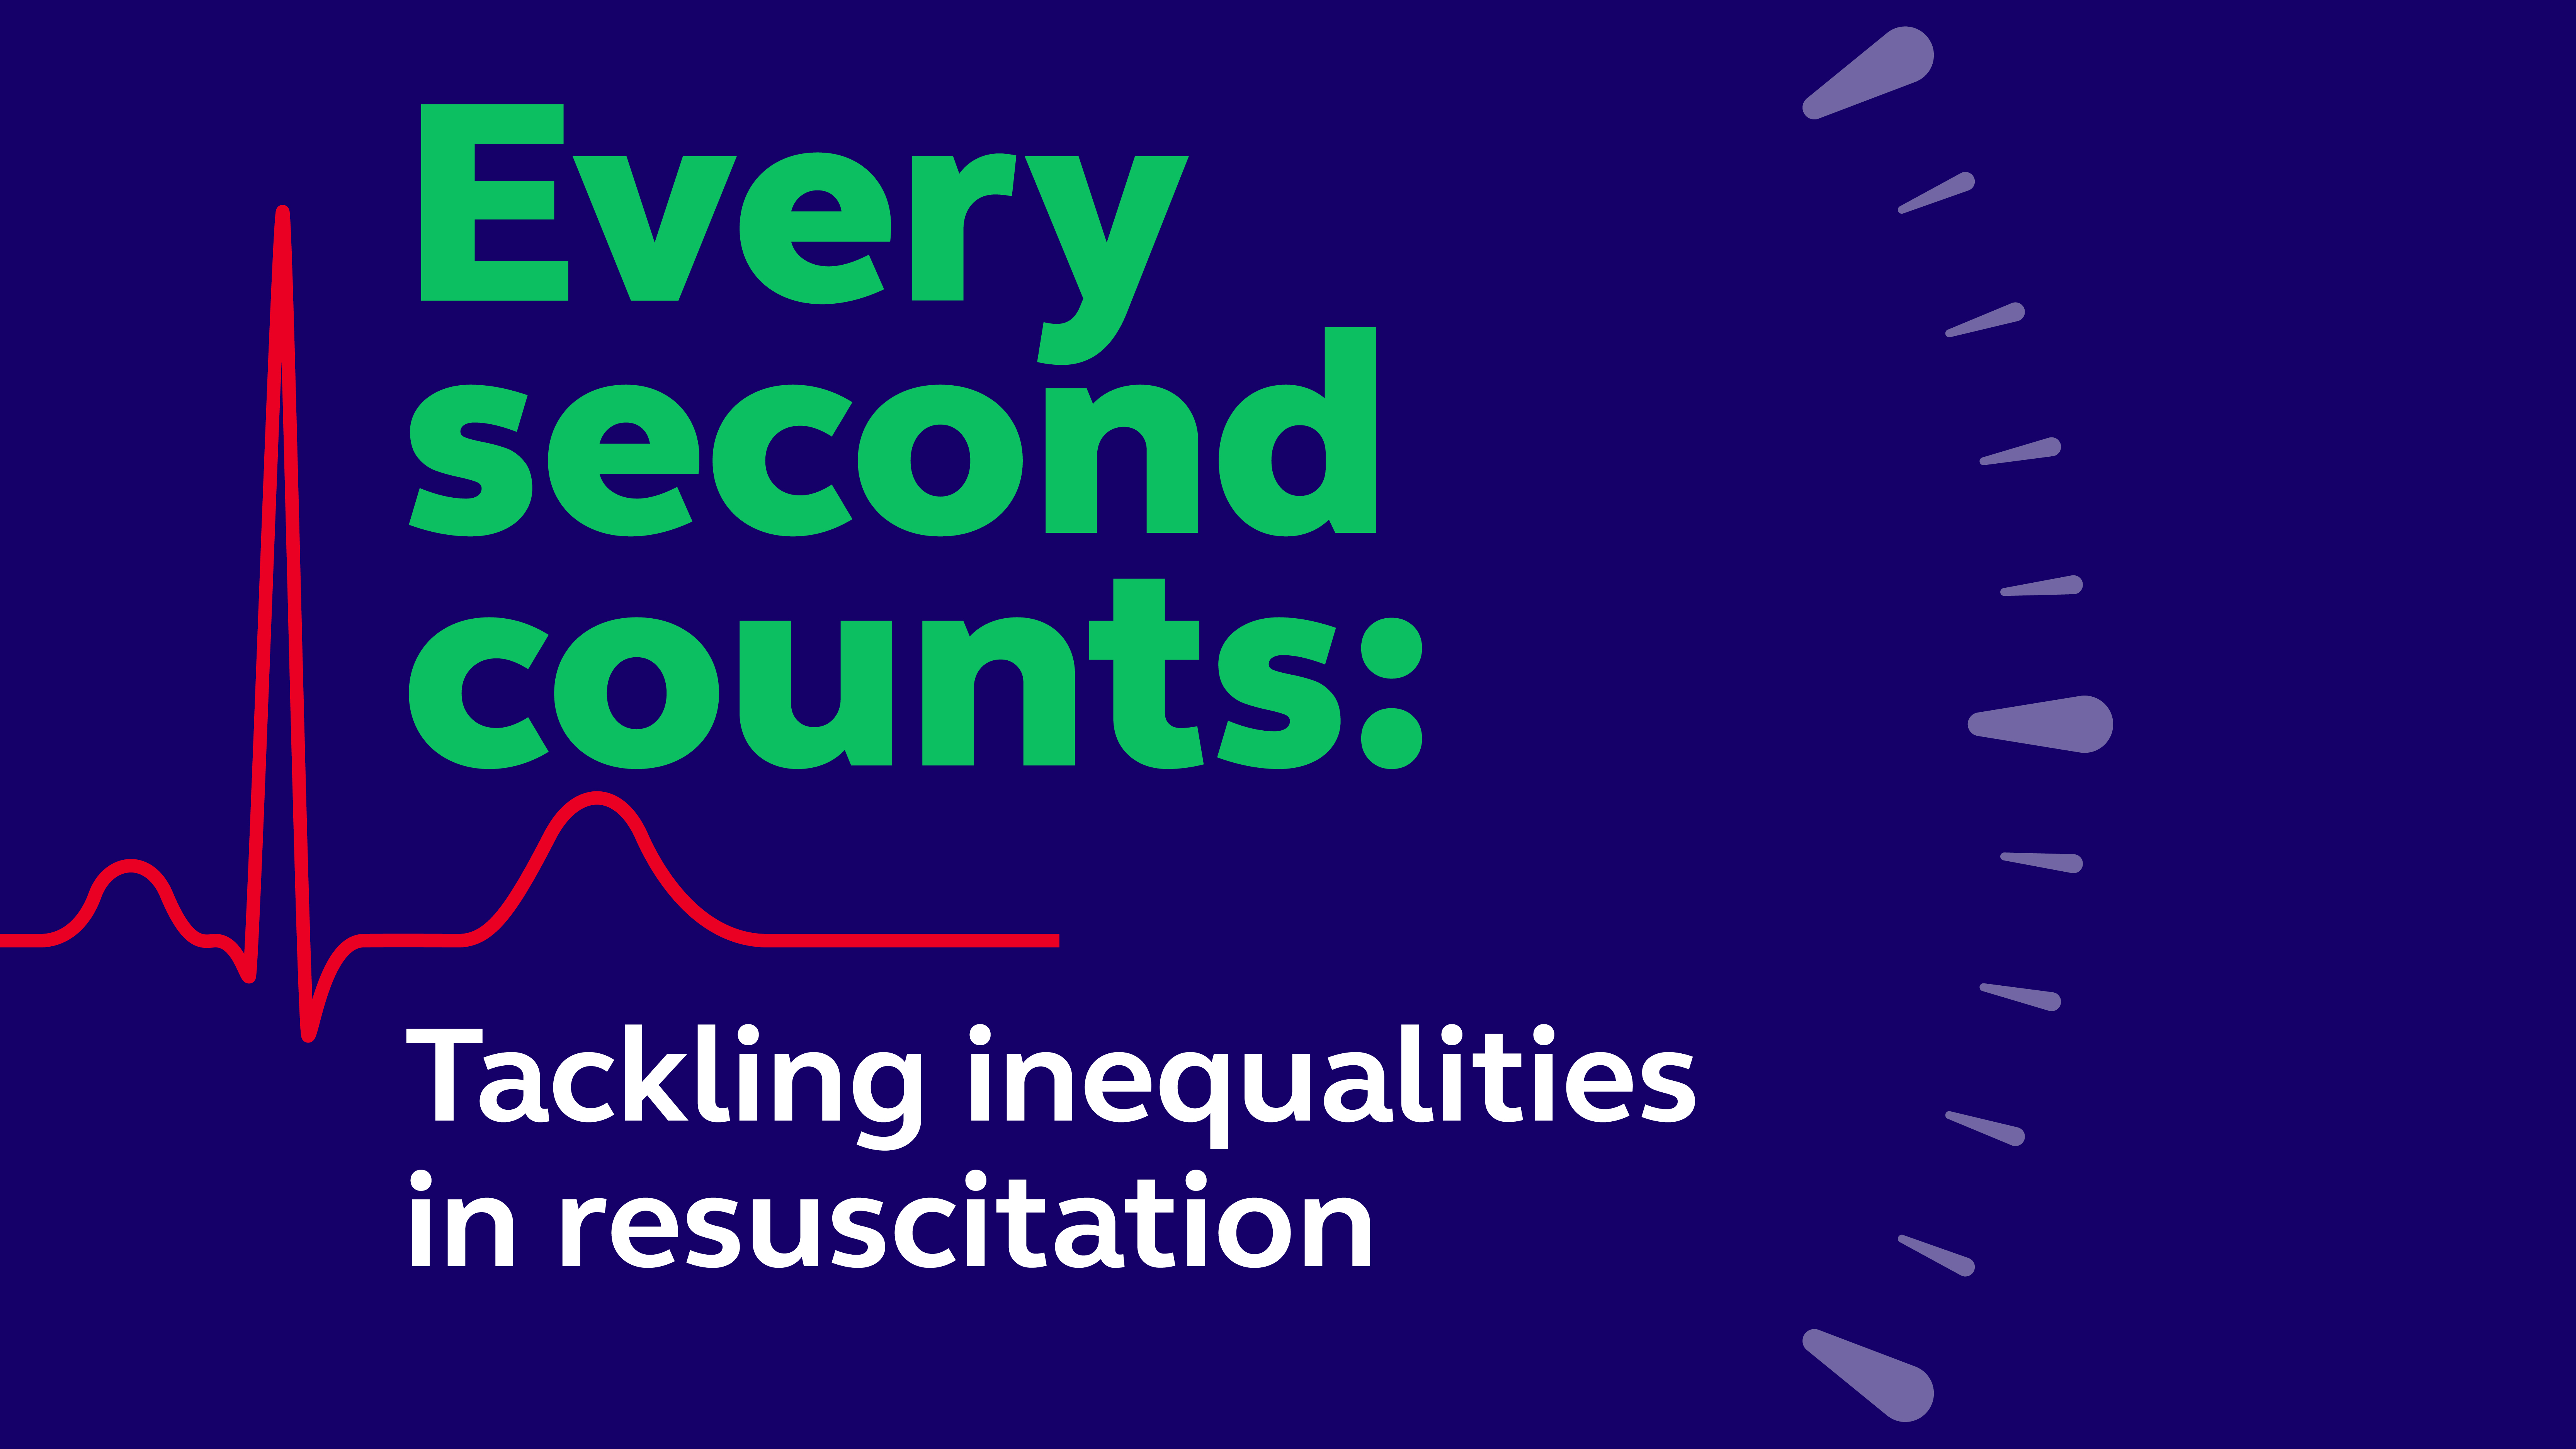 Every second counts: Tackling inequalities in resuscitation 